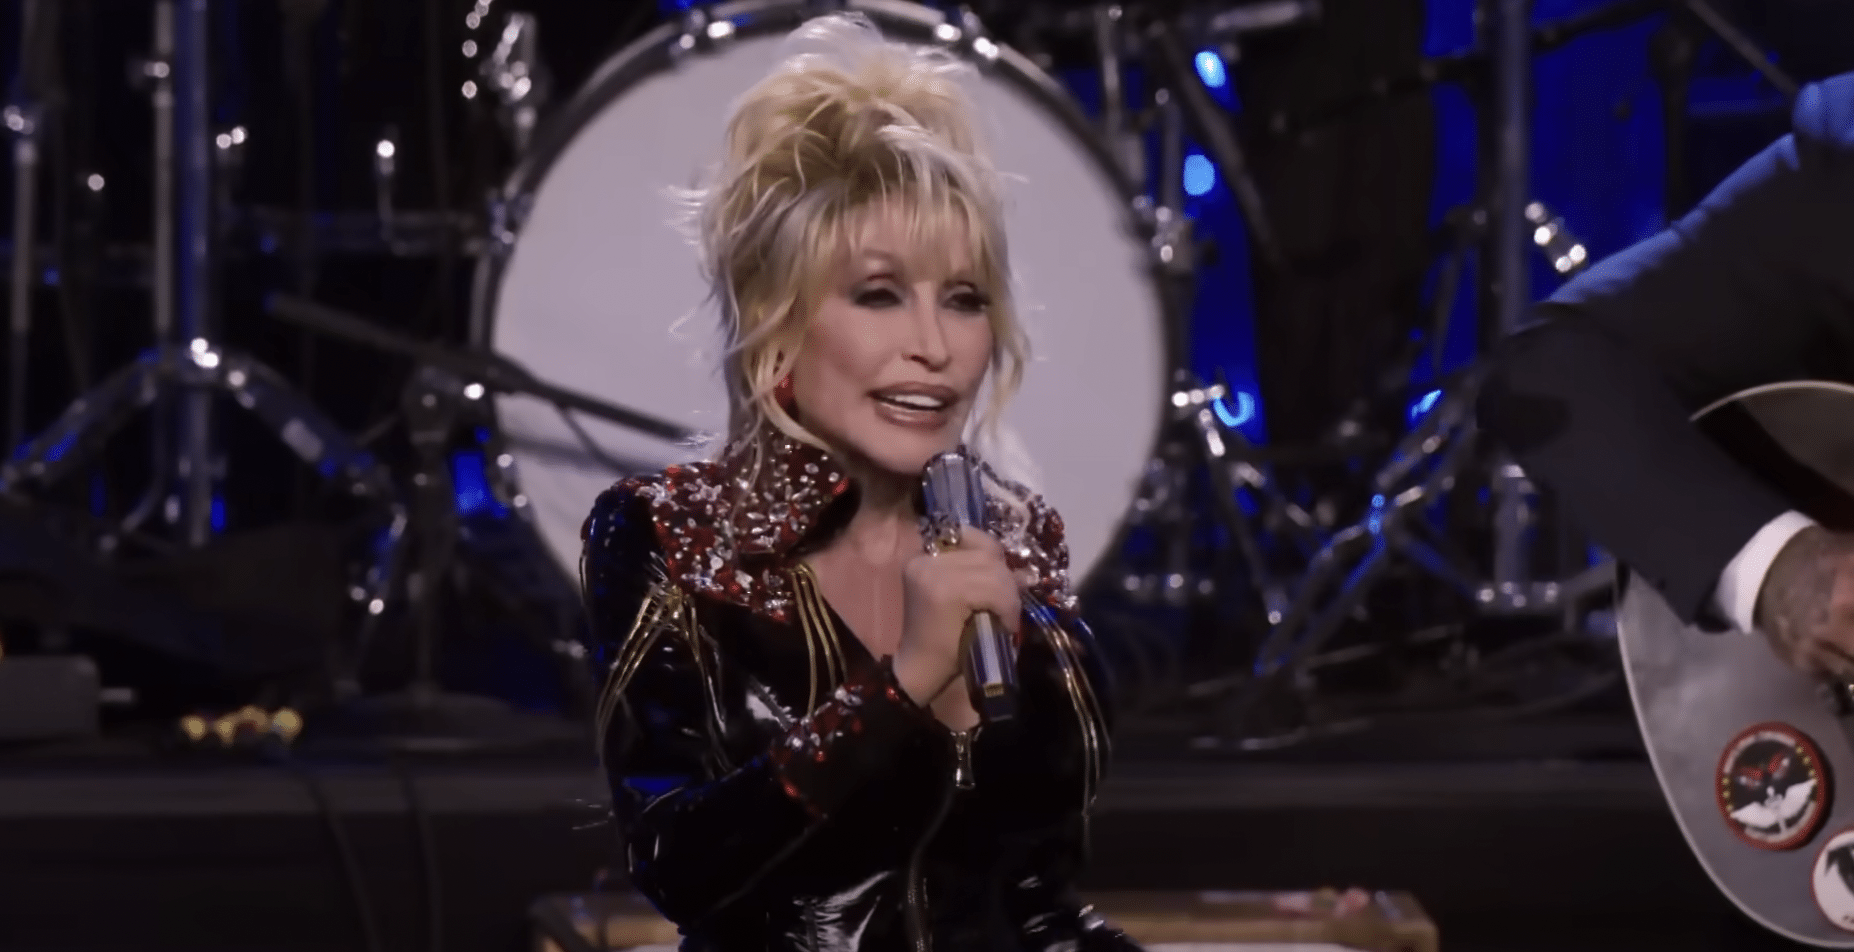 Dolly Parton sings "Jolene" live at Rock & Roll Hall of Fame 2022